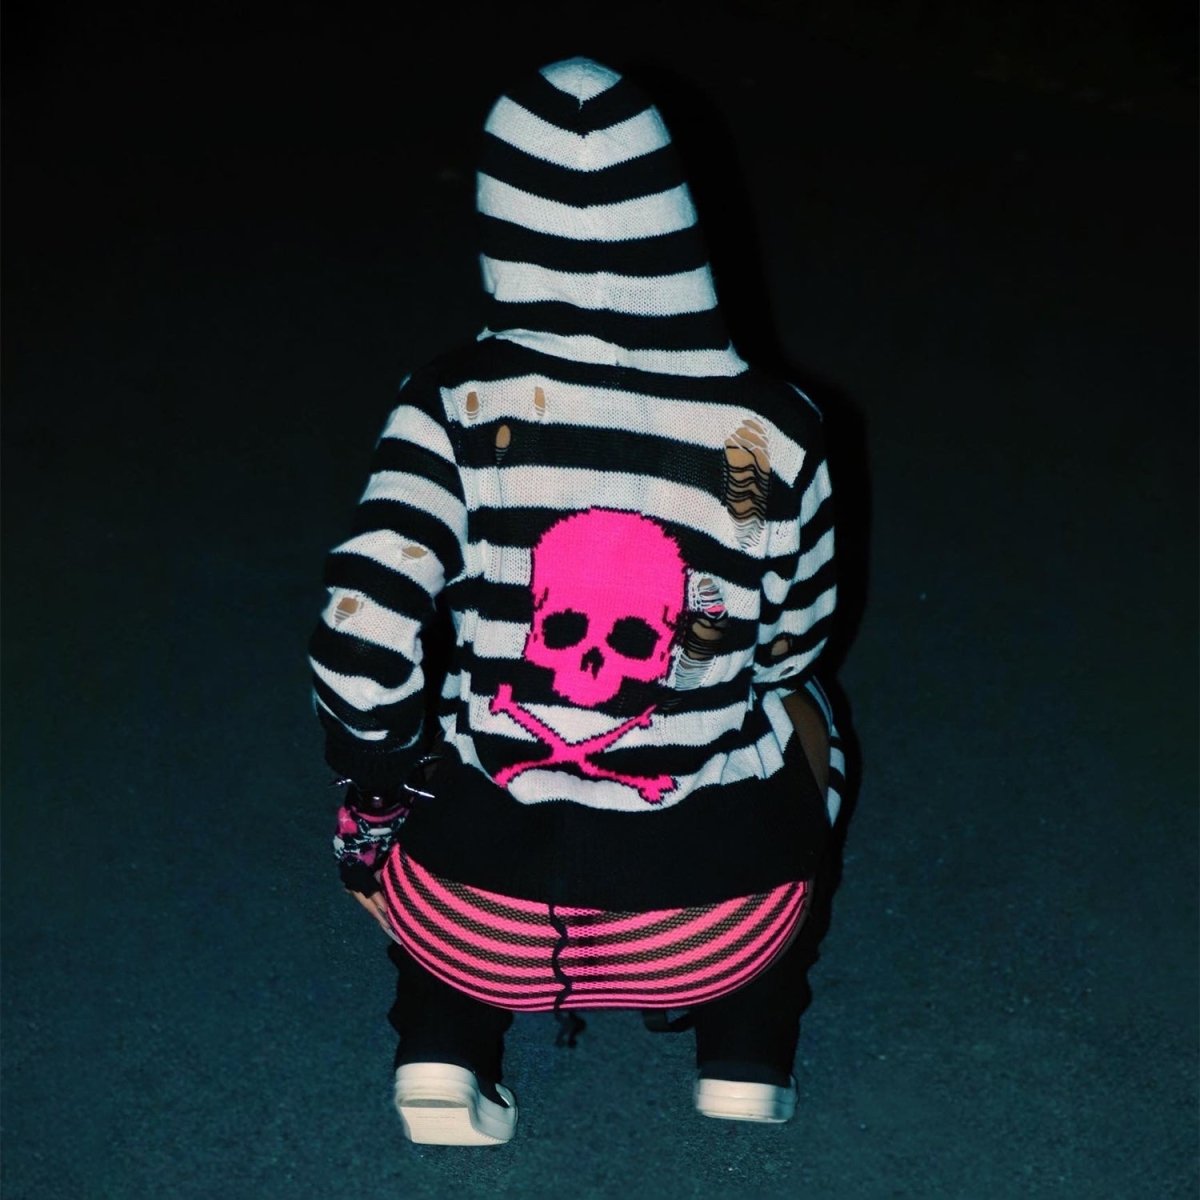 Too Fast | Pink Skull Striped Zip Up Long Sleeve Cardigan Sweater